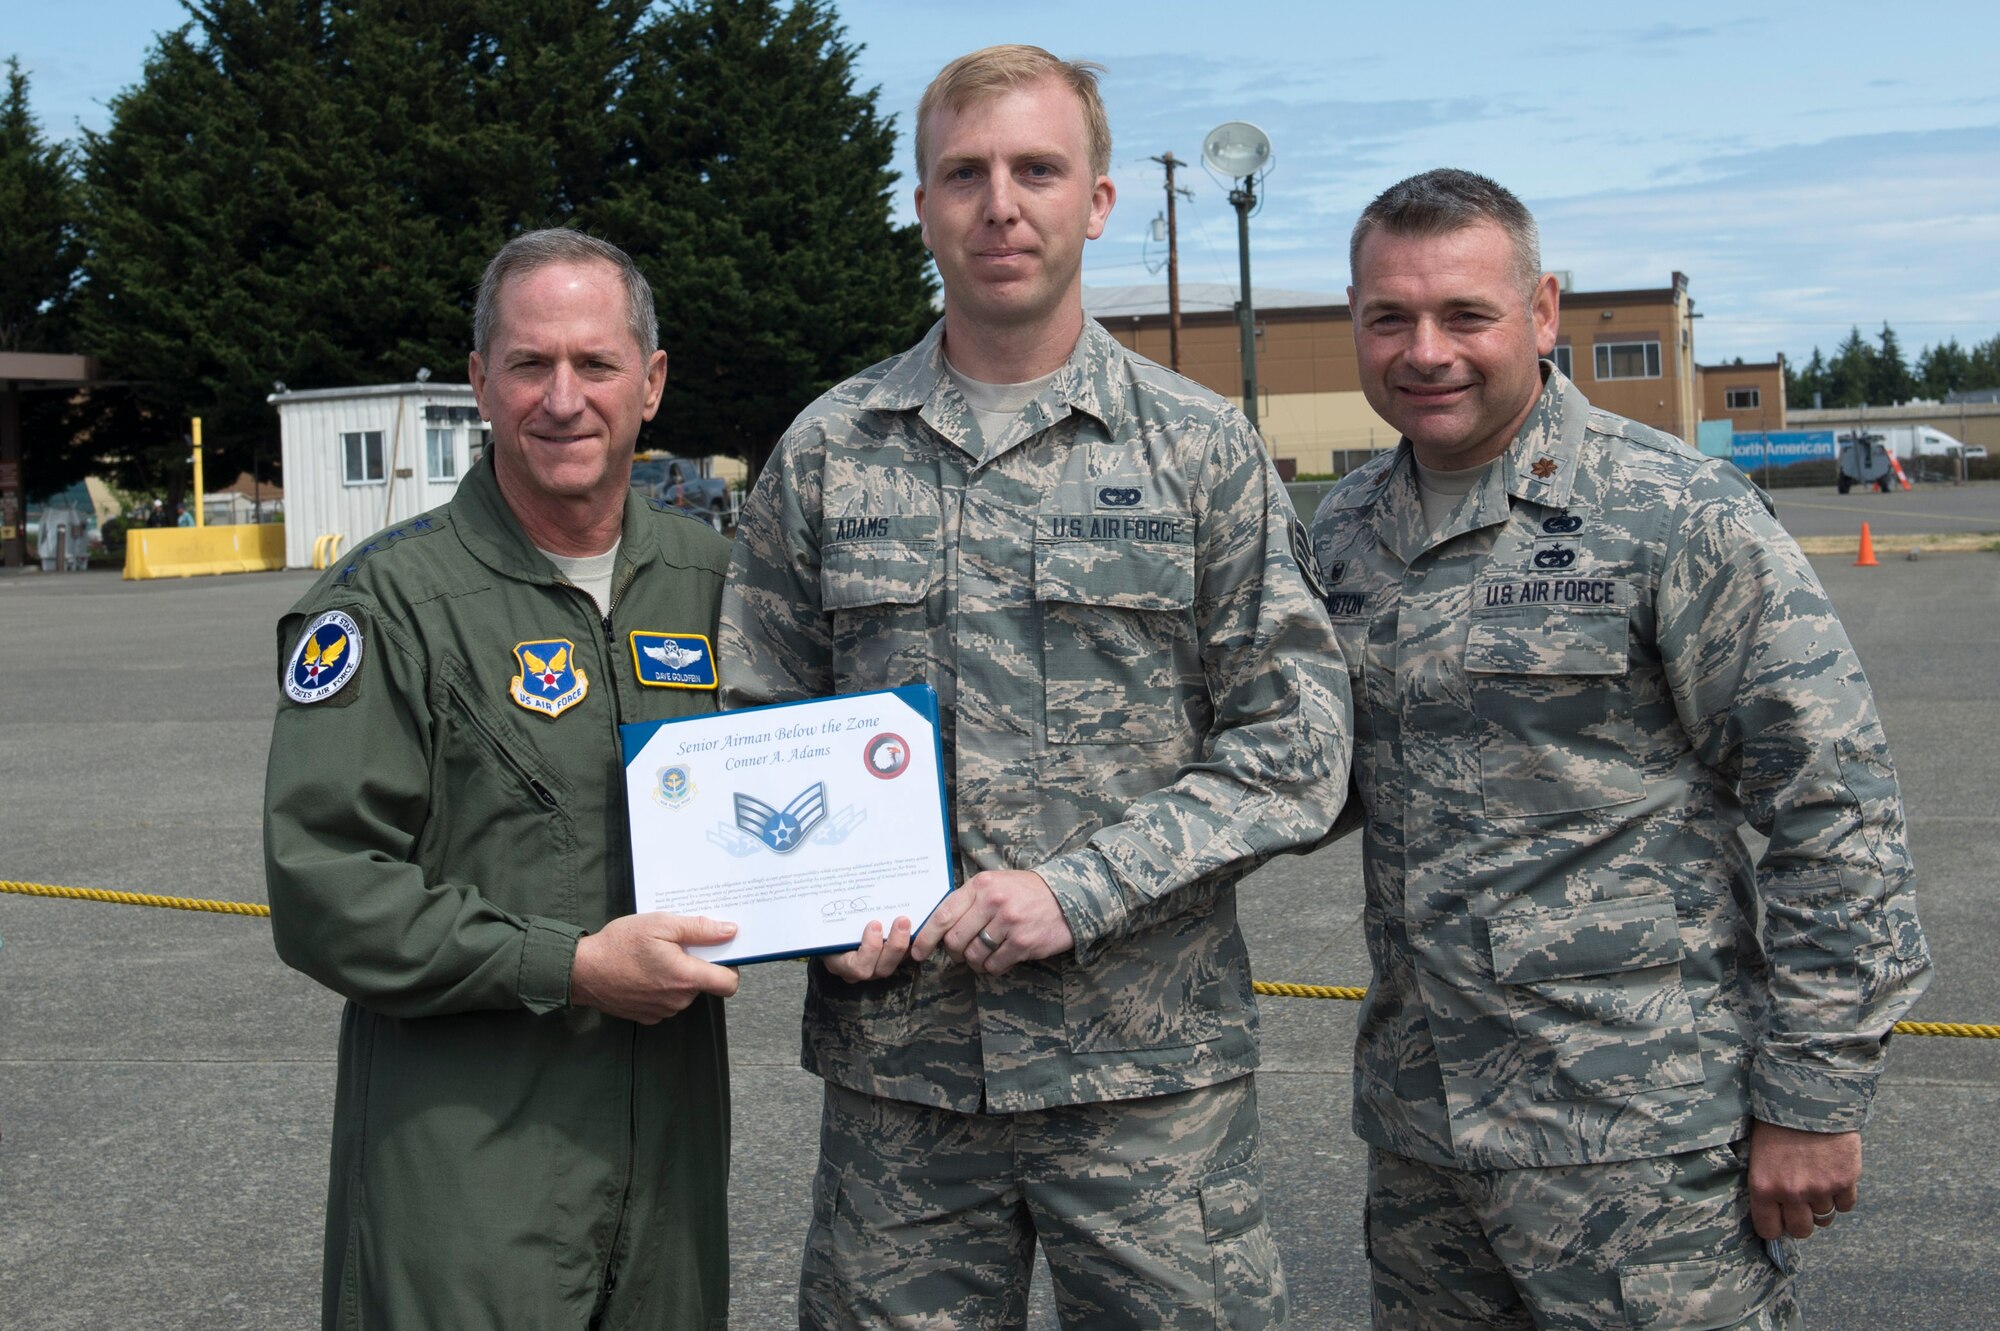 Gen David Goldfein, Chief of Staff of the Air Force, presents Airman 1st Class Conner Adams, 62nd Aerial Port Squadron, with a Senior Airman Below the Zone (BTZ) promotion, June 6, 2018, at Joint Base Lewis-McChord, Wash. An Airman selected for a BTZ promotion is promoted to Senior Airman six months earlier than their scheduled time-in-grade promotion. (U.S. Air Force photo by A1C Sara Hoerichs)